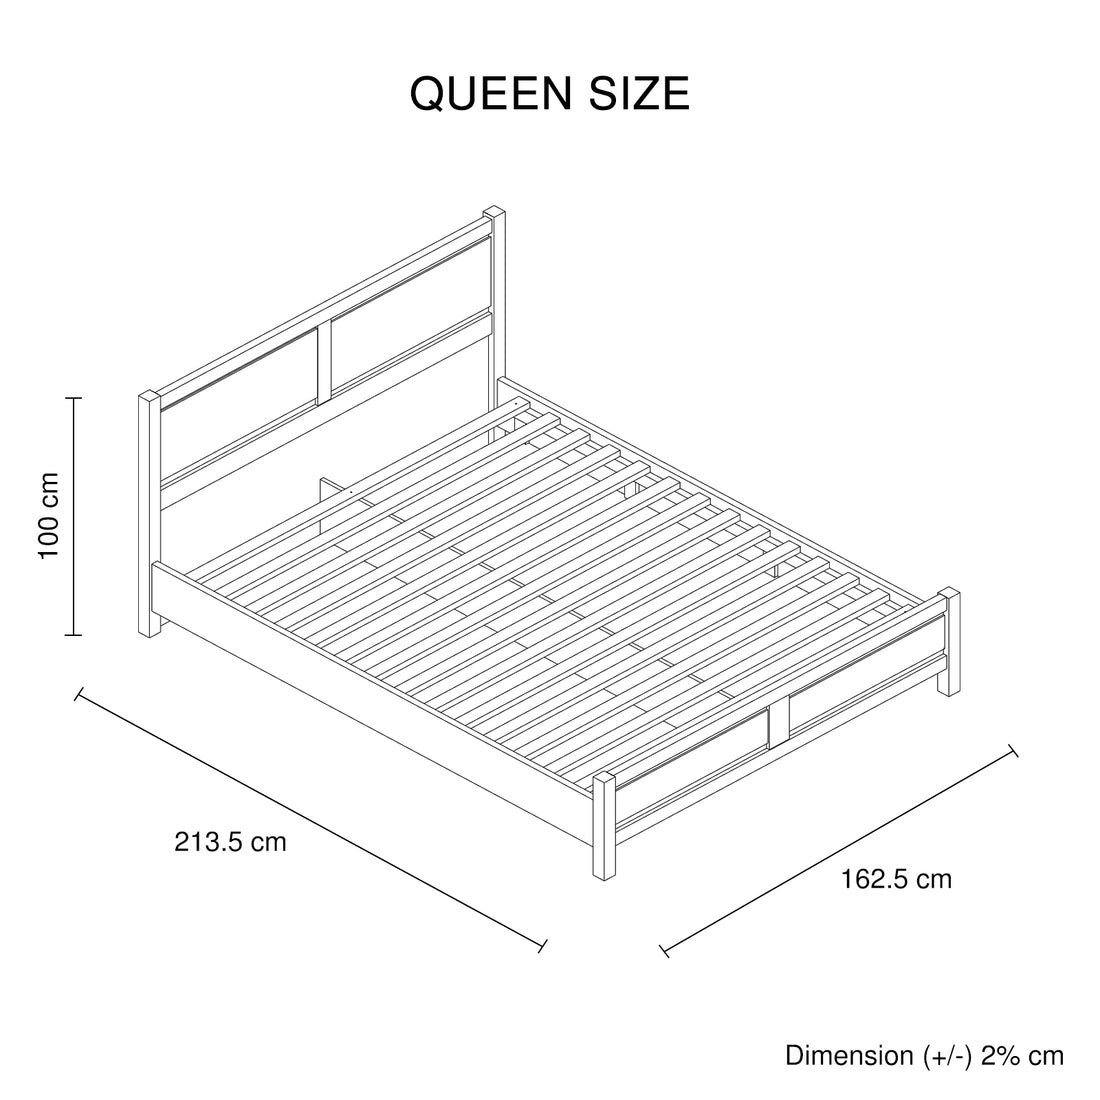 3 Piece Bedroom Queen Suite White Ash - Bed, Bedside Table